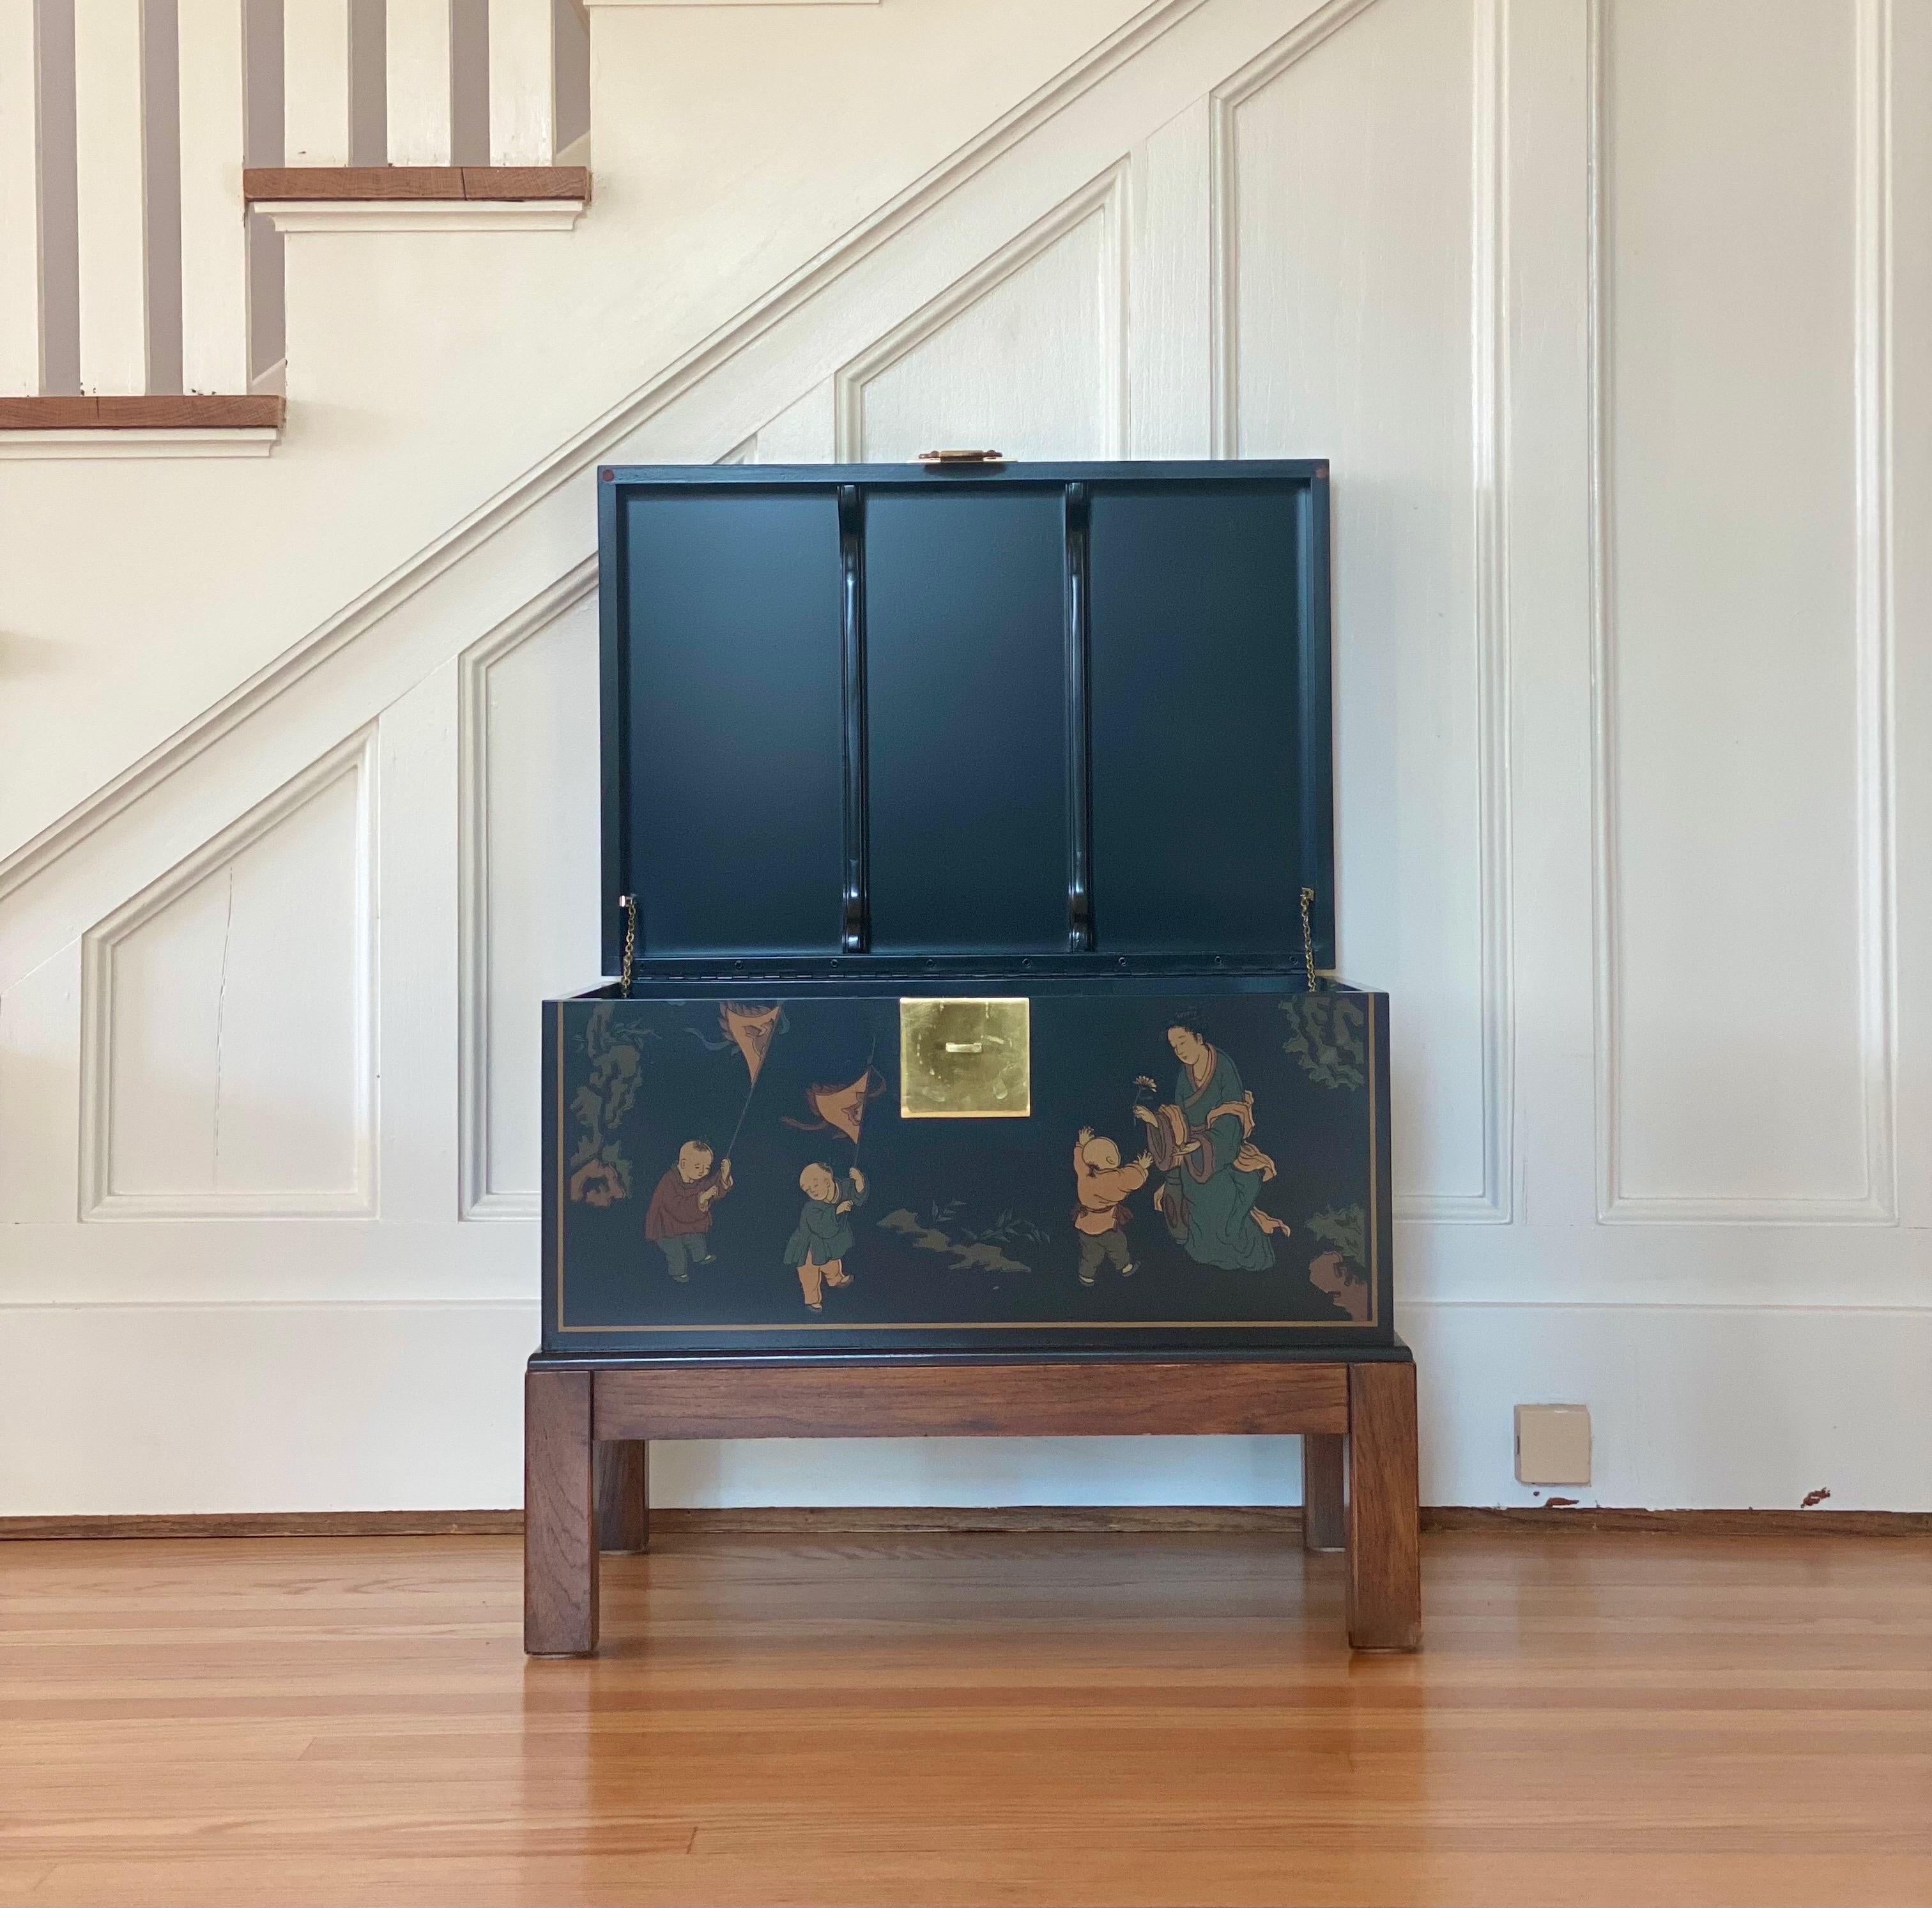 We are very pleased to offer a stunning Chinoiserie chest, circa the 1950s. Crafted of solid hardwood and finished in a rich black lacquer, this beautiful piece boasts ample storage and style. It’s artfully finished with hand painted images of